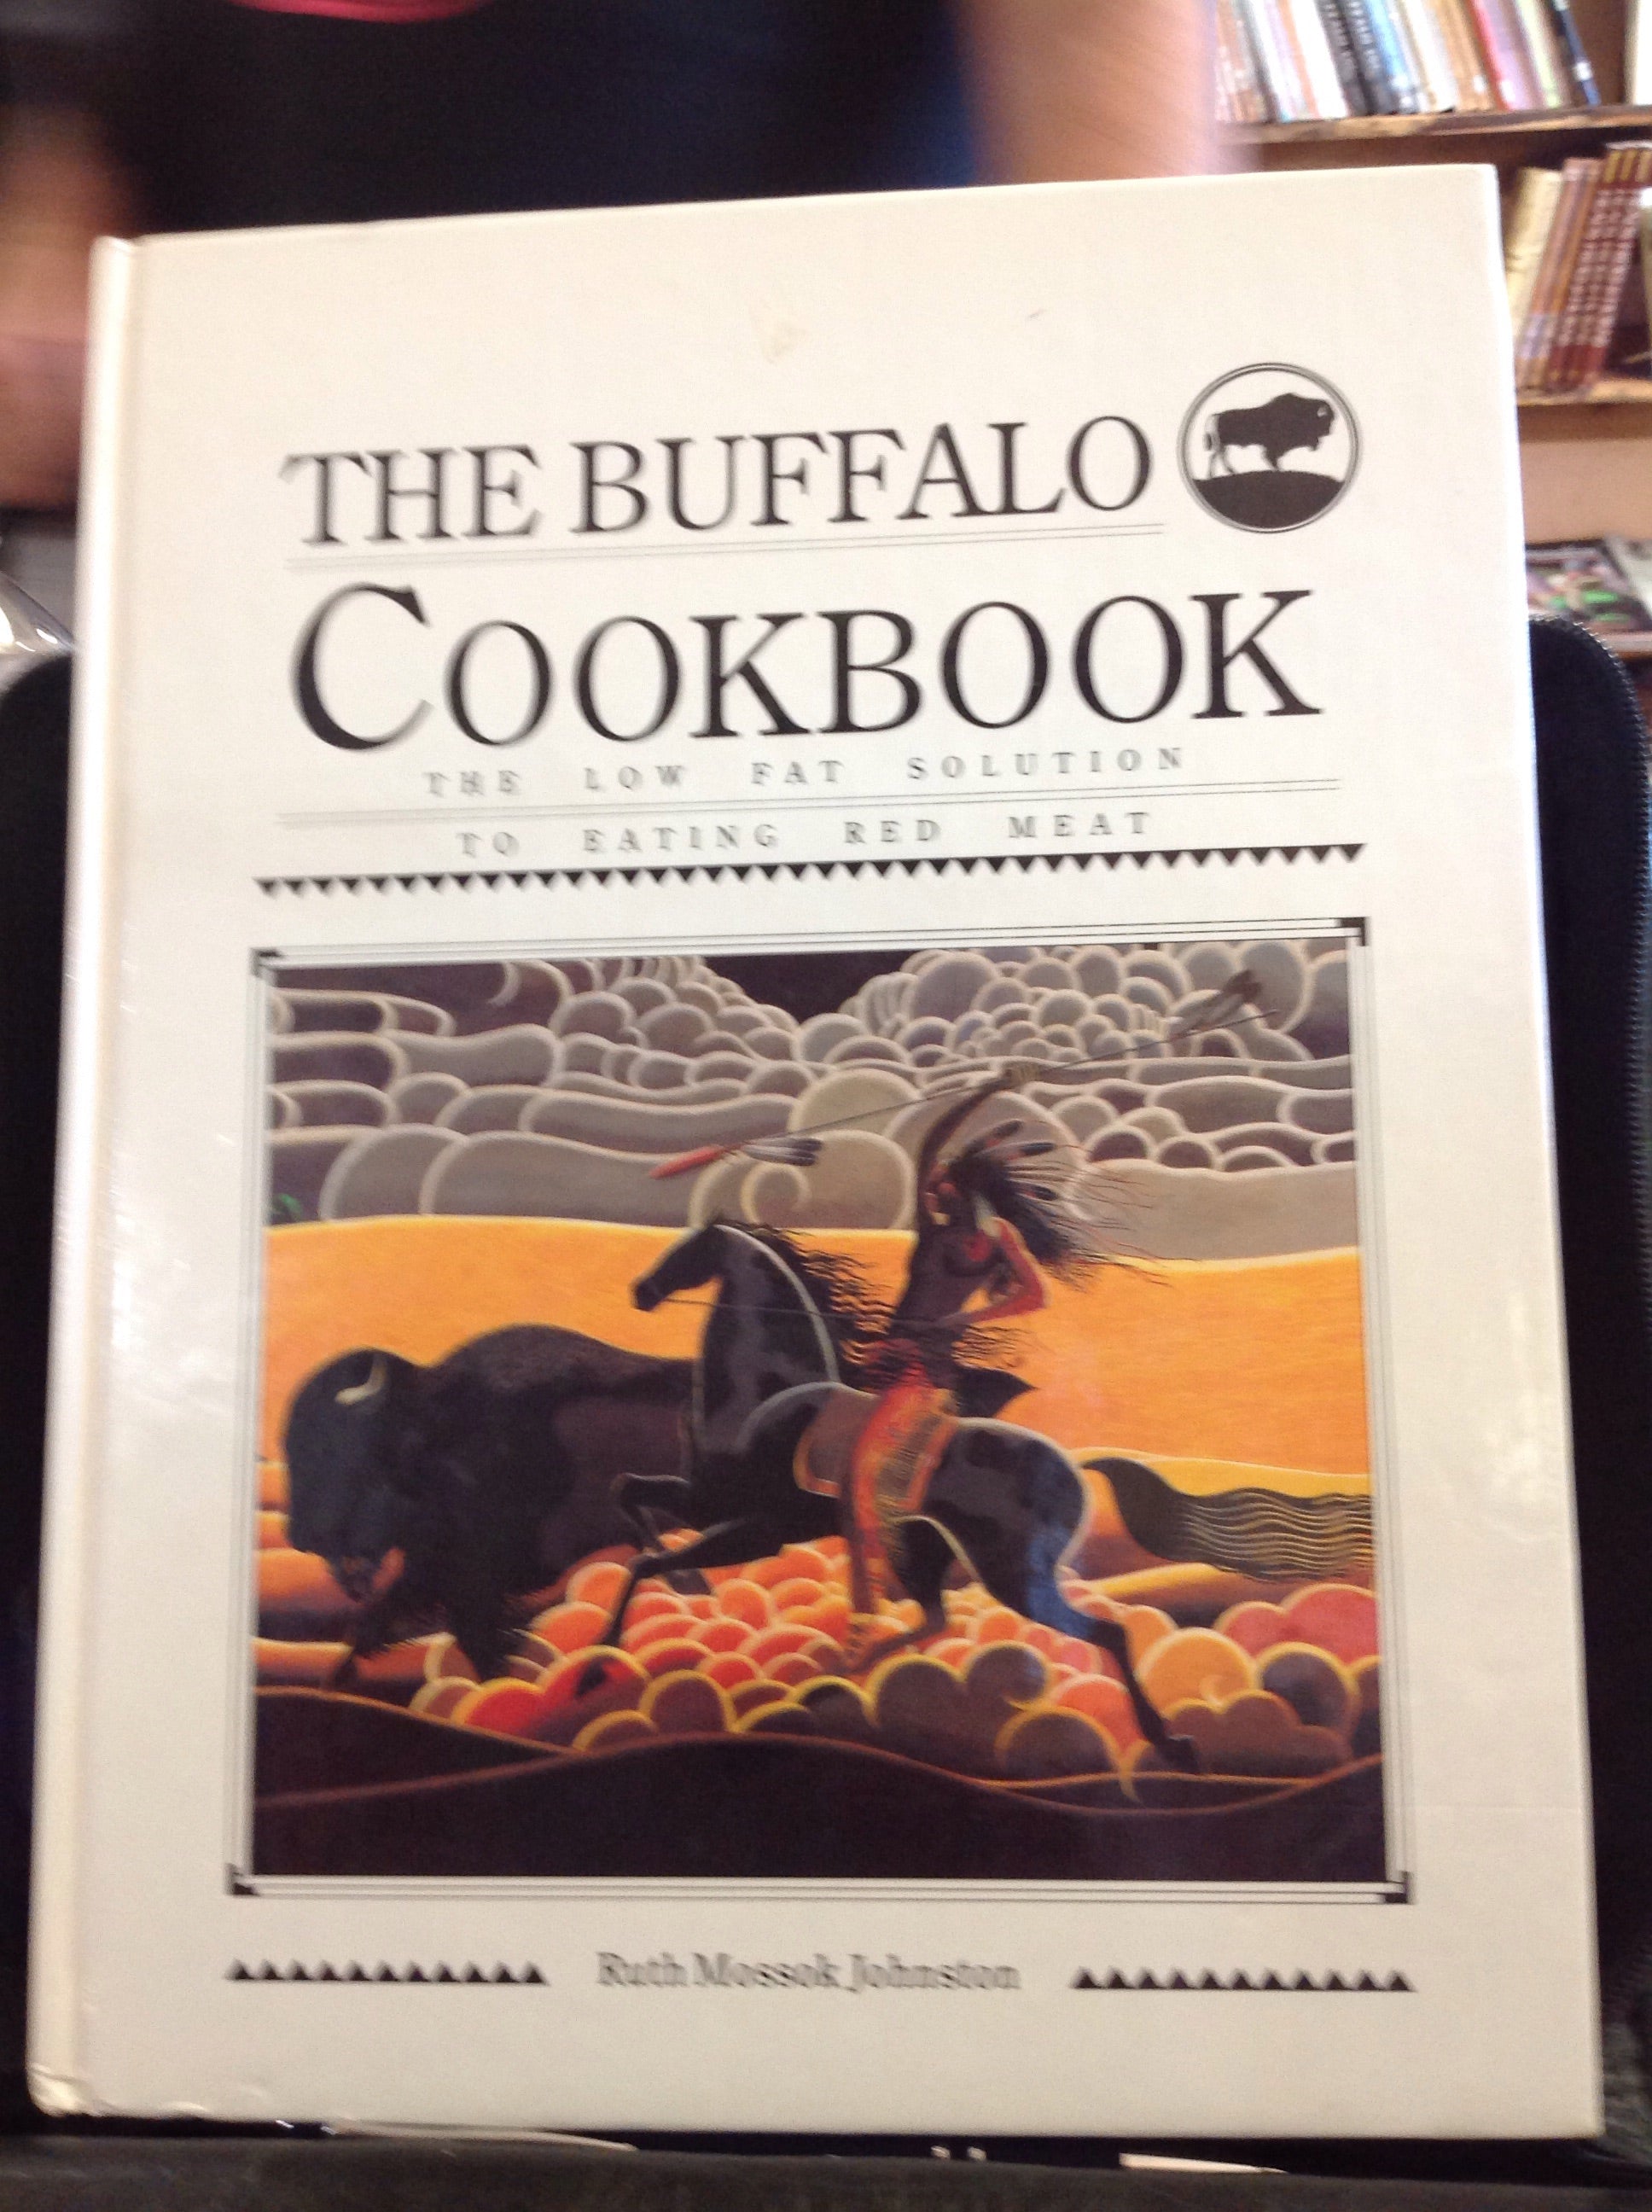 BOOKS - The Buffalo Cookbook: The Low Fat Solution to Eating Red Meat